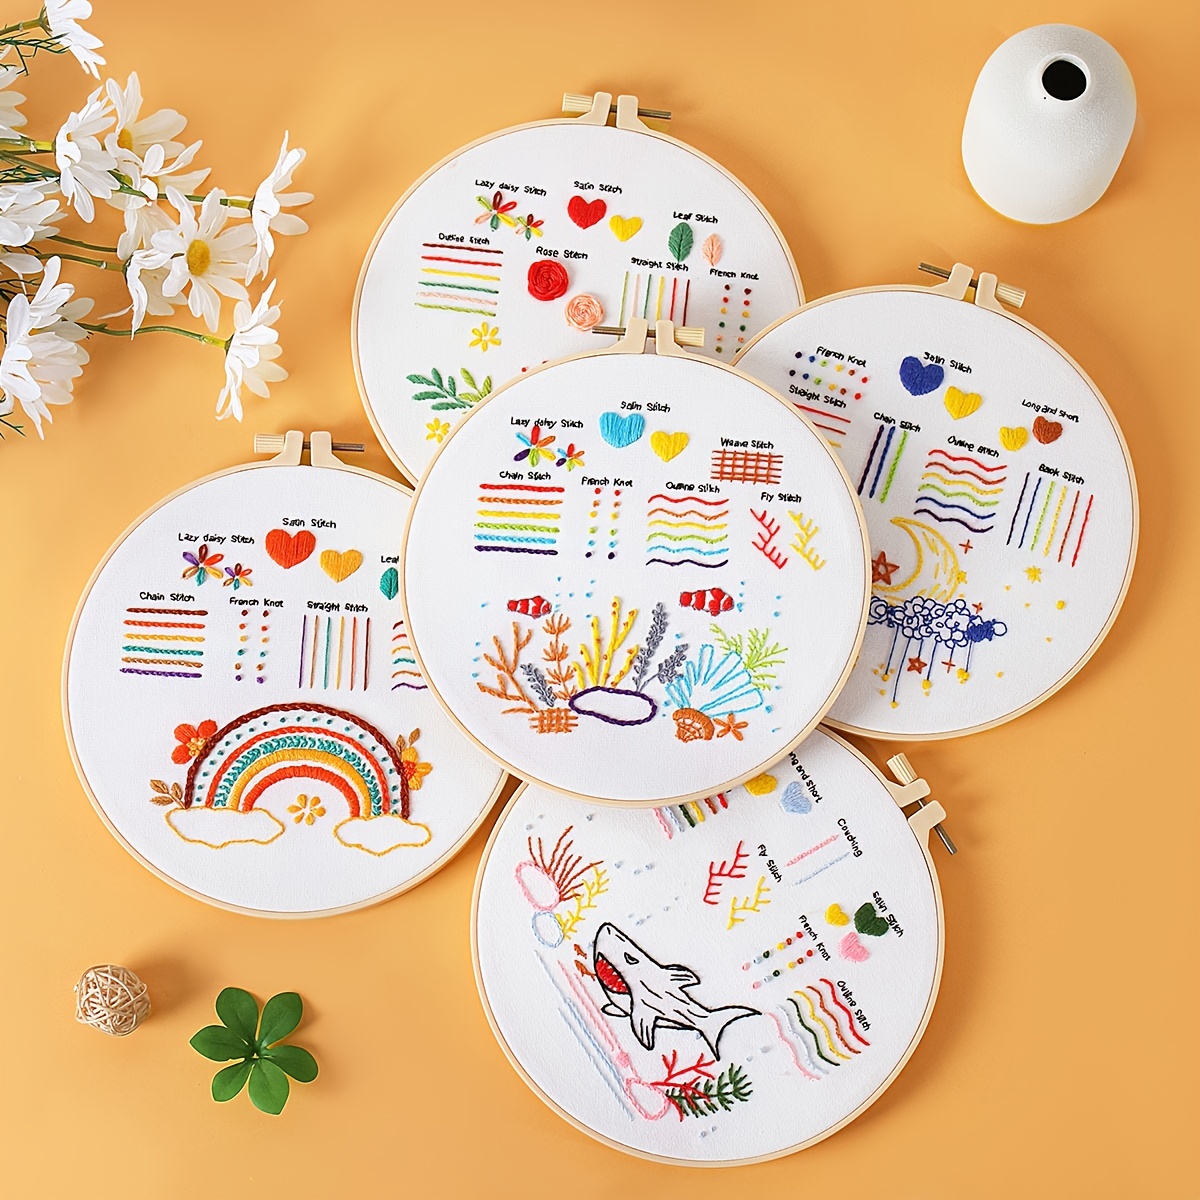  Embroidery Kit for Beginners,Cross Stitch Kits for Adults DIY  Craft 3pcs Embroidery Pattern Needlework Fabric Embroidery Thread and  Needles 1pcs Embroidery Hoop Adult Stitch Stuff Sewing Kit Gift